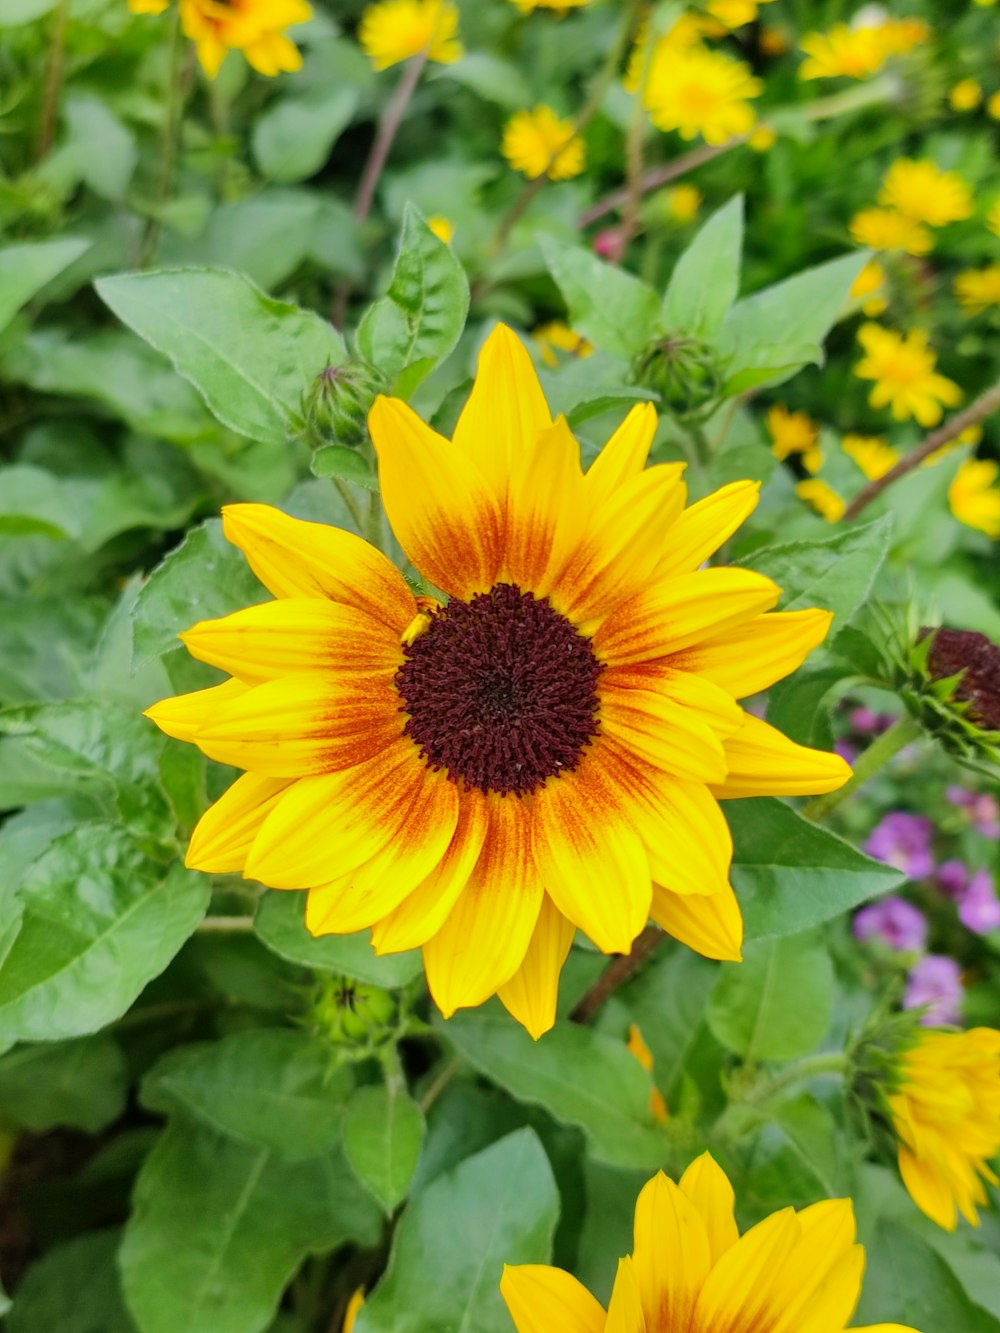 a sunflower in a field of yellow and purple flowers